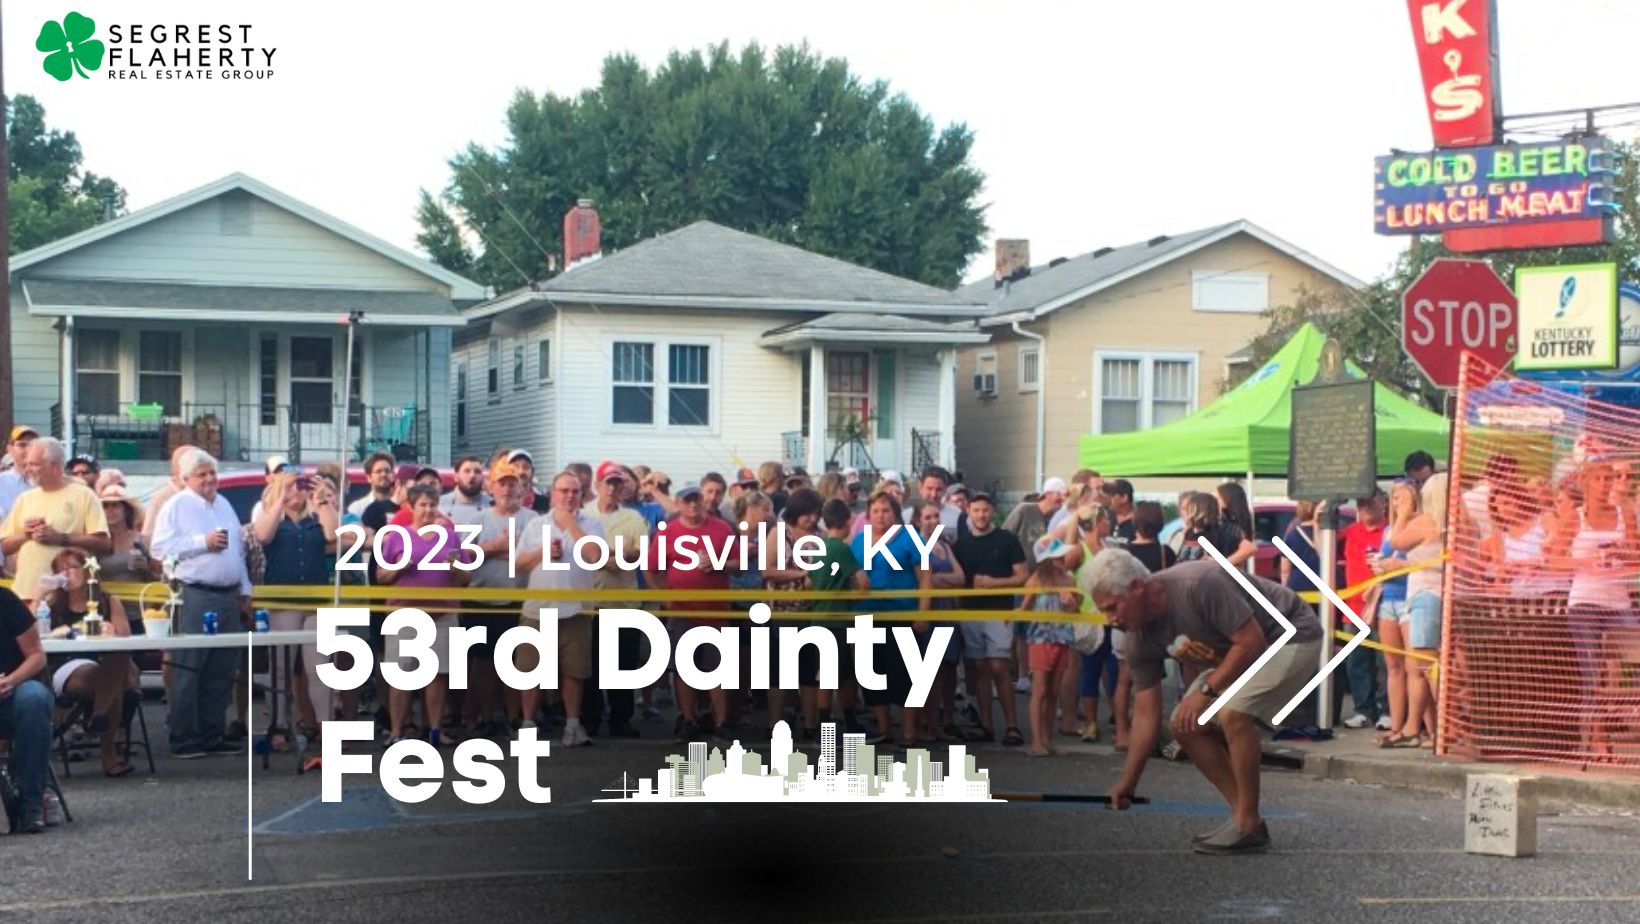 Dainty Fest 2023 Embrace Louisville's 53rd Annual Schnitzelburg Tradition!